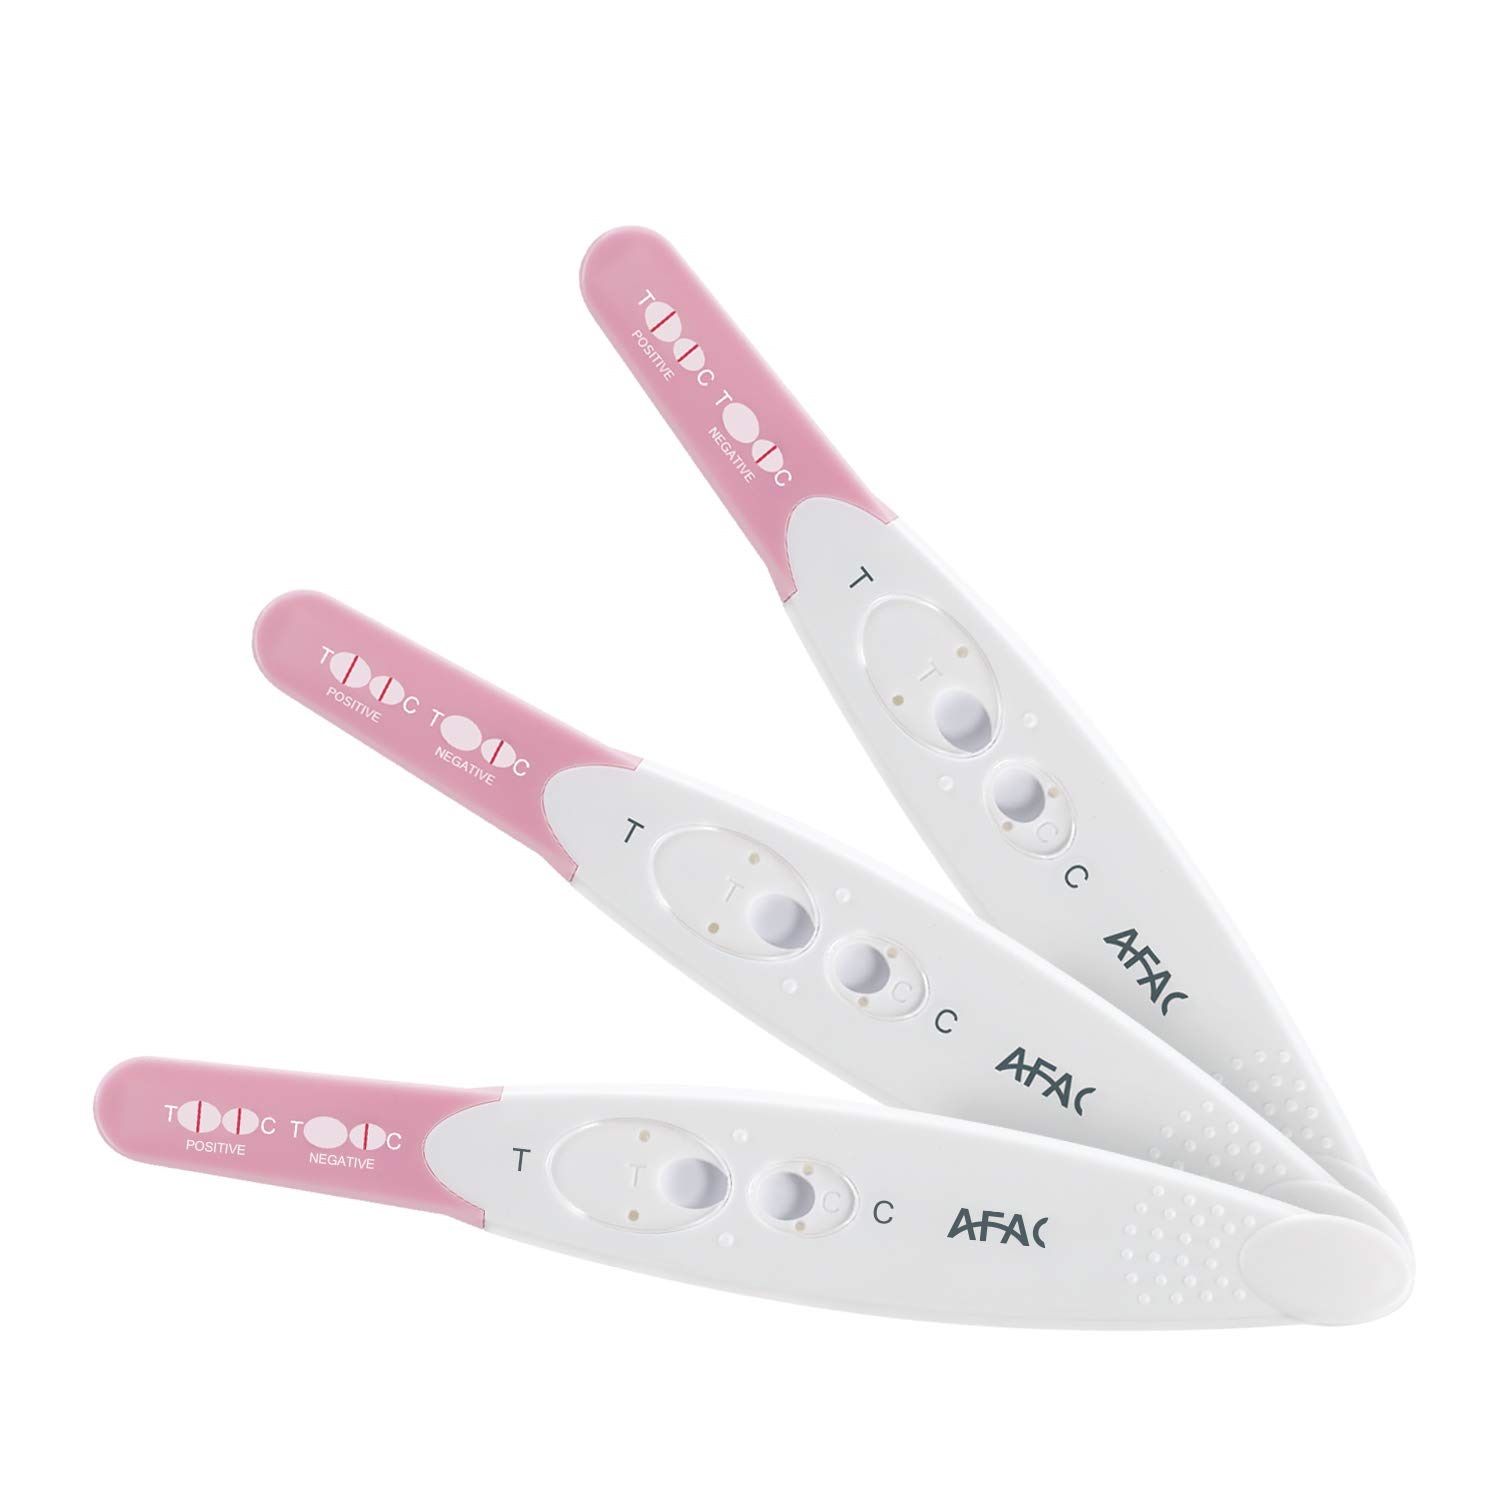 Early Pregnancy Tests The Best Of 2019 